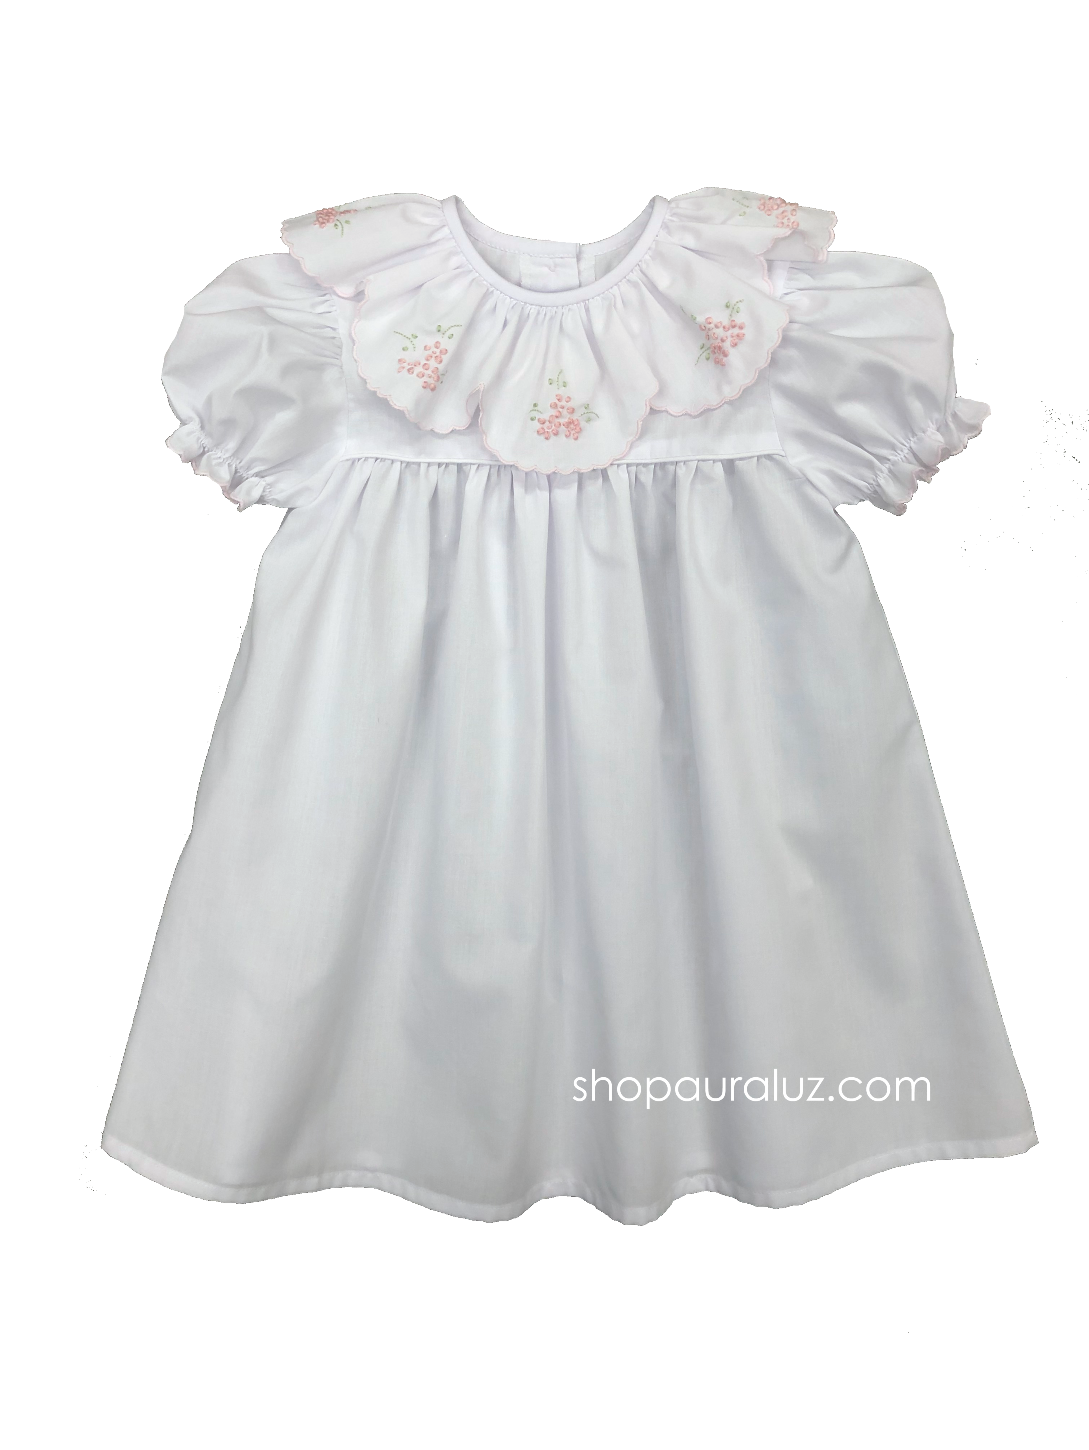 Auraluz Day Gown...White with ruffle collar,pink scallop trim and embroidered flowers